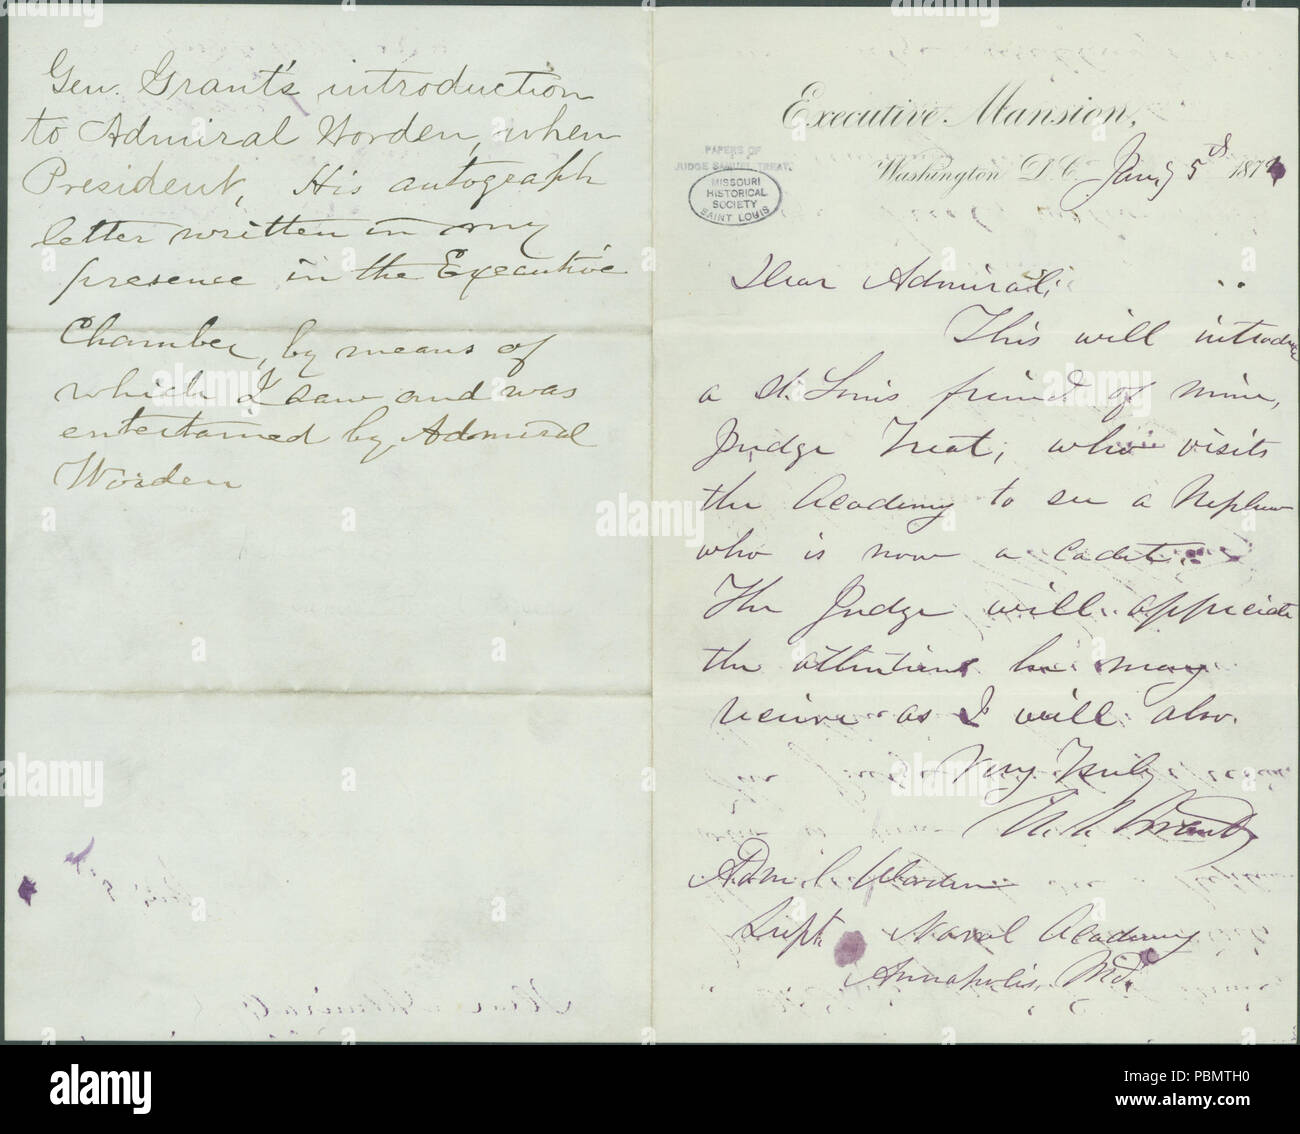 913 Letter signed U.S. Grant, Executive Mansion, Washington, D.C., to Admiral Worden, Annapolis, Md., January 5, 1874 Stock Photo